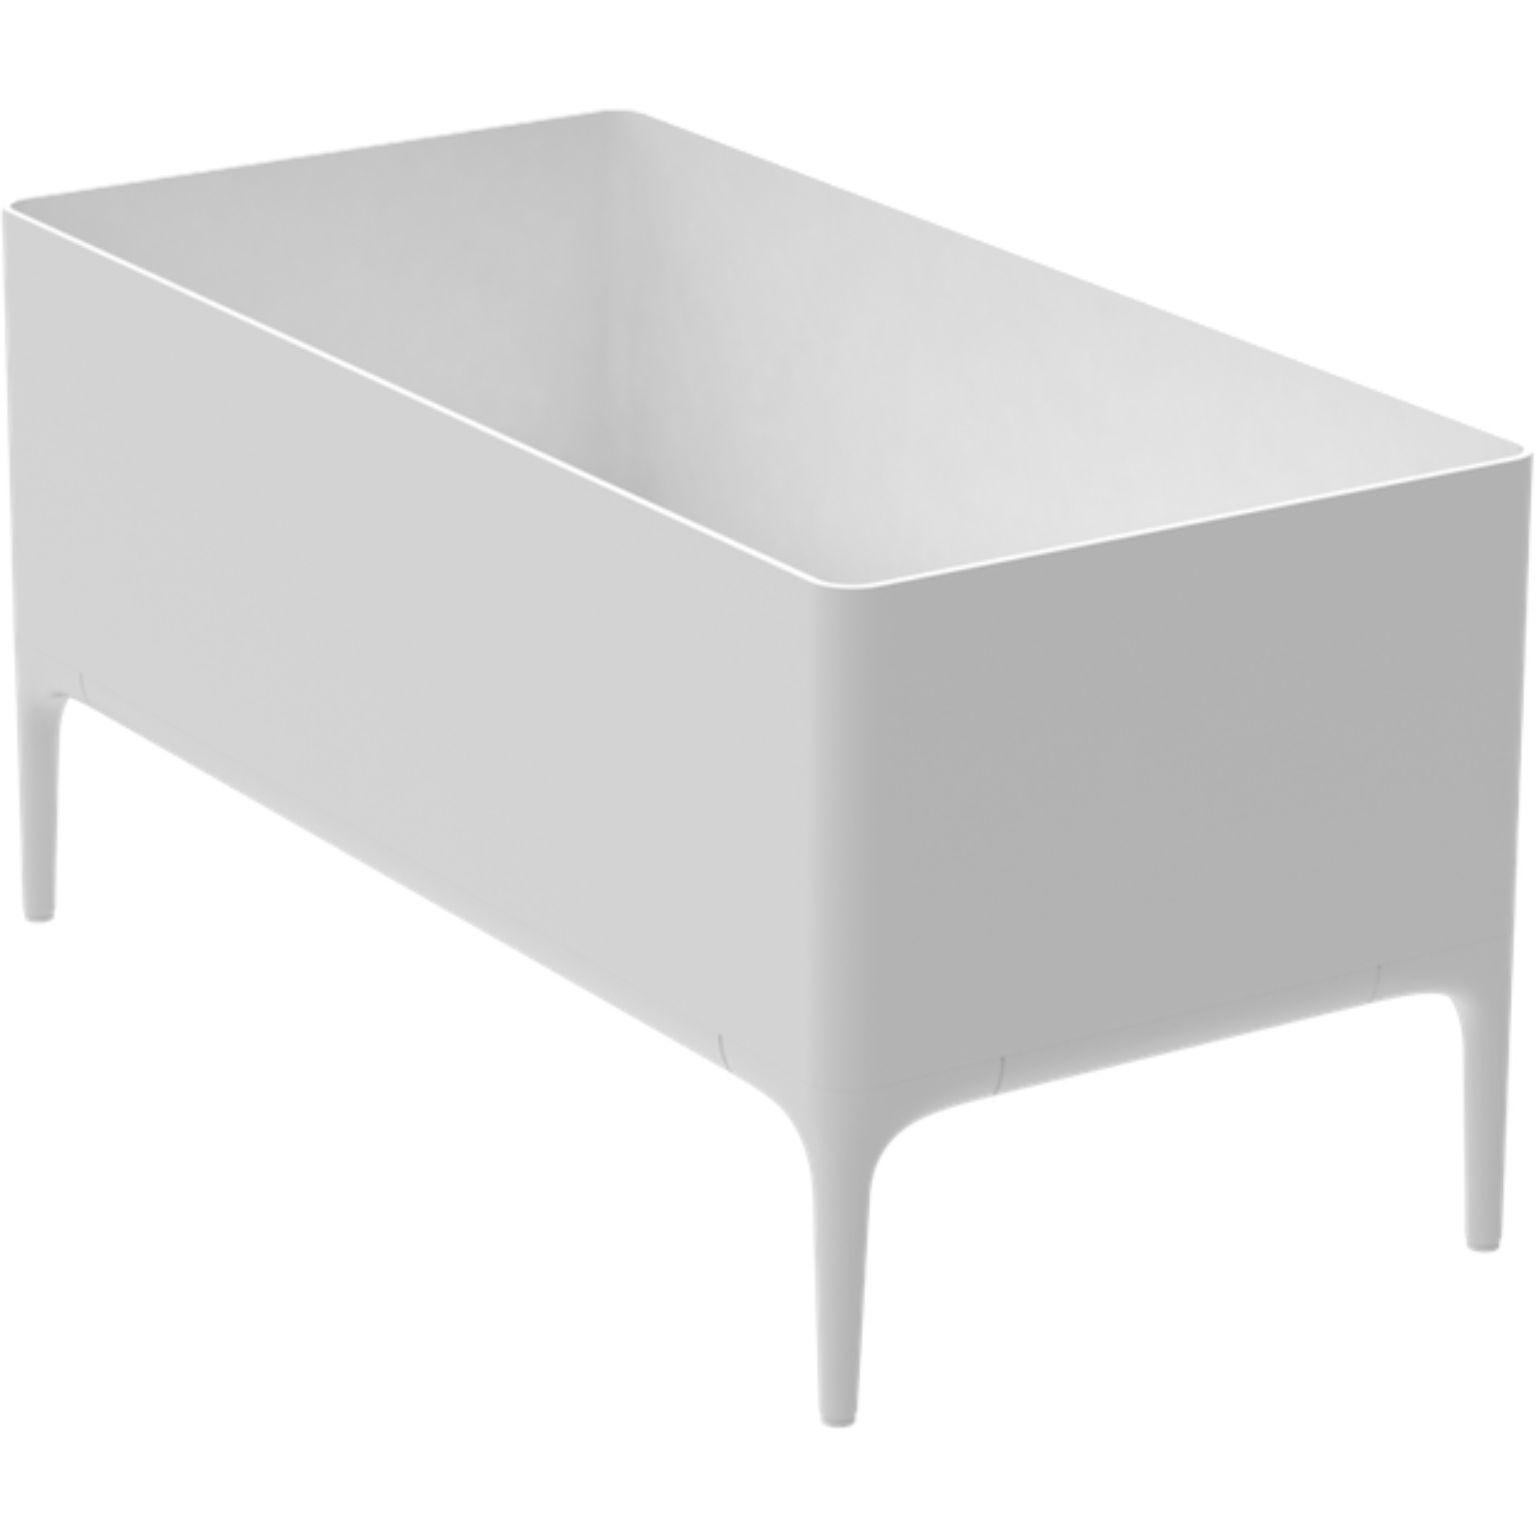 Xaloc white planter by MOWEE
Dimensions: D90 x W45 x H45 cm
Material: aluminium
Weight: 11 kg
Also available in different colours and finishes. 

 Xaloc synthesizes the lines of interior furniture to extrapolate to the exterior, creating an